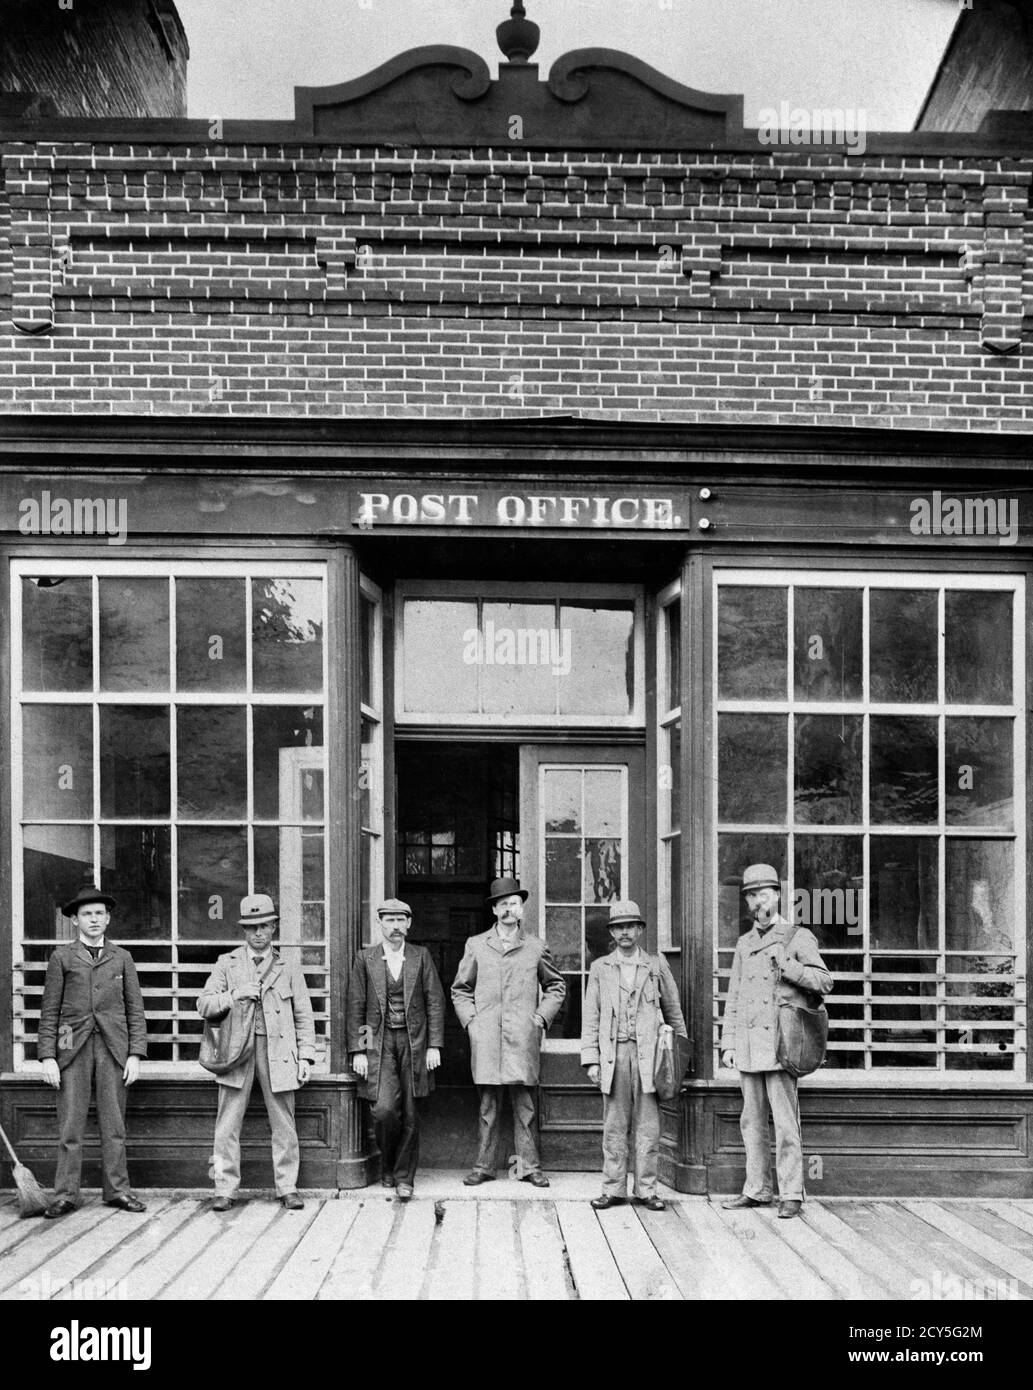 1900s 1910s TURN OF THE 20TH CENTURY GROUP OF UNIFORMED MEN POSTMEN CARRYING LEATHER MAIL BAGS IN FRONT OF POST OFFICE BUILDING - o3415 LEF001 HARS DOORS DOORWAY MAIL OLD TIME POSTMAN NOSTALGIA INDUSTRY OLD FASHION MANY COMMUNICATION TEAMWORK SUITS TURN WORKMAN LINED LIFESTYLE HISTORY ARCHITECTURE VERTICAL GROWNUP 6 UNITED STATES COPY SPACE FULL-LENGTH PERSONS POSTAL UNITED STATES OF AMERICA MALES SIX BUILDINGS DOORWAYS B&W GOVERNMENT WINDOWS NORTH AMERICA EYE CONTACT NORTH AMERICAN OFFICES STRUCTURE WORKMEN MANUAL PROPERTY CUSTOMER SERVICE TURN OF THE 20TH CENTURY WORKFORCE Stock Photo